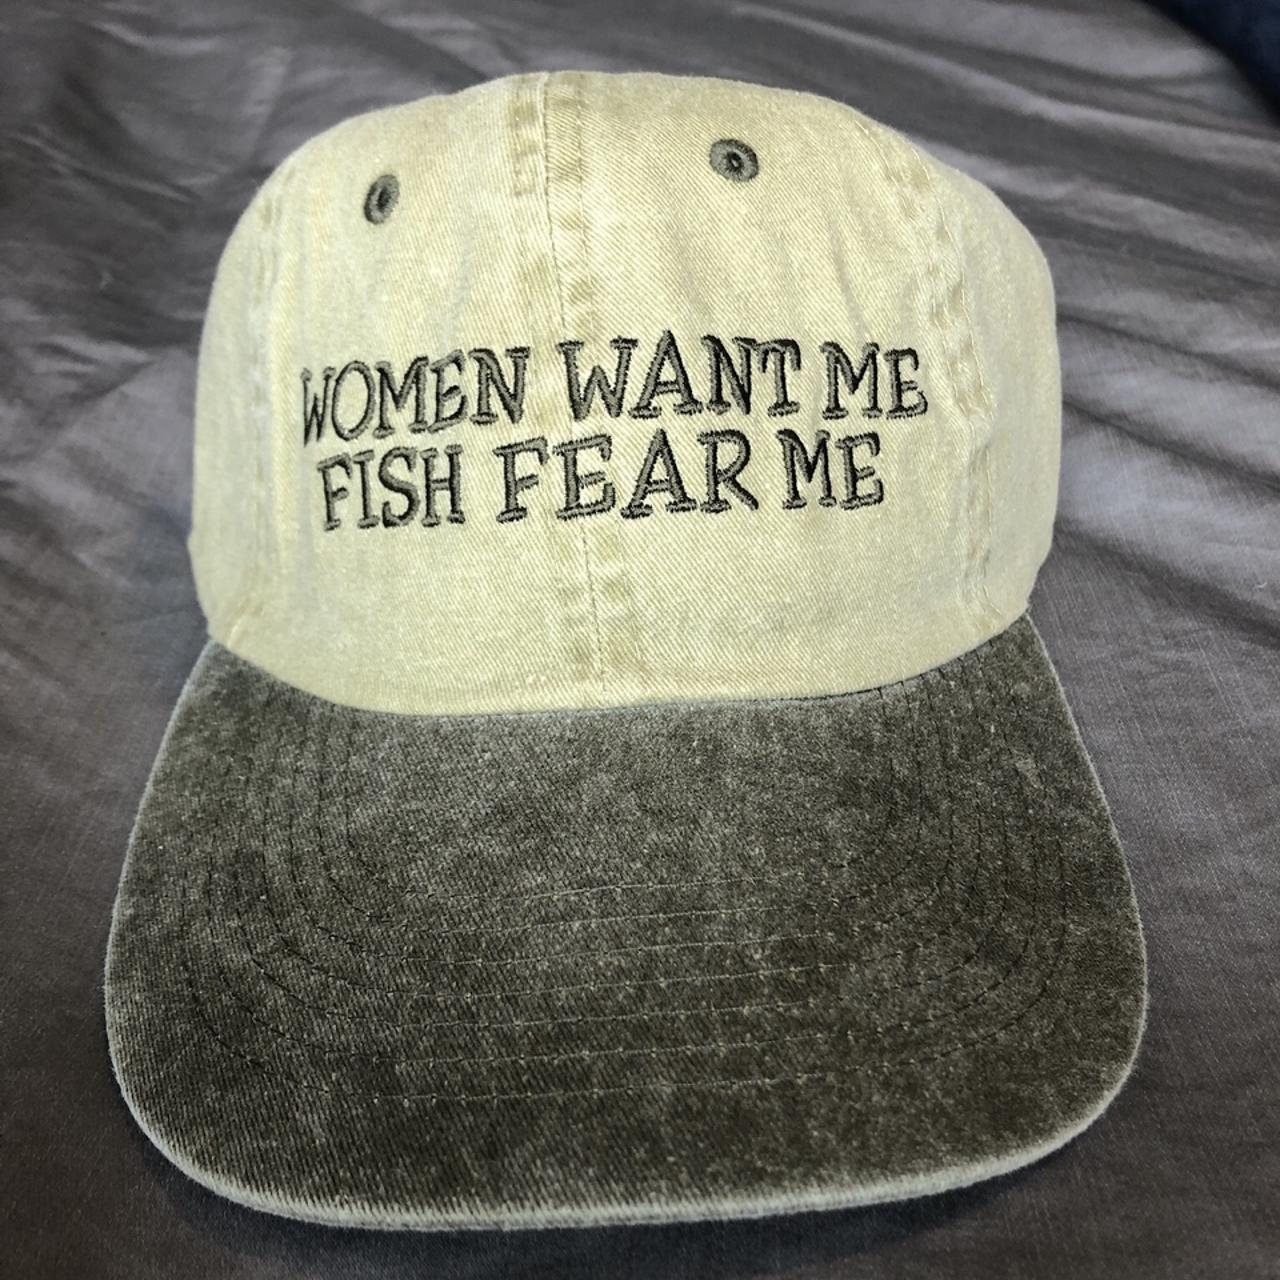 the iconic women want me, fish fear me dad - Depop